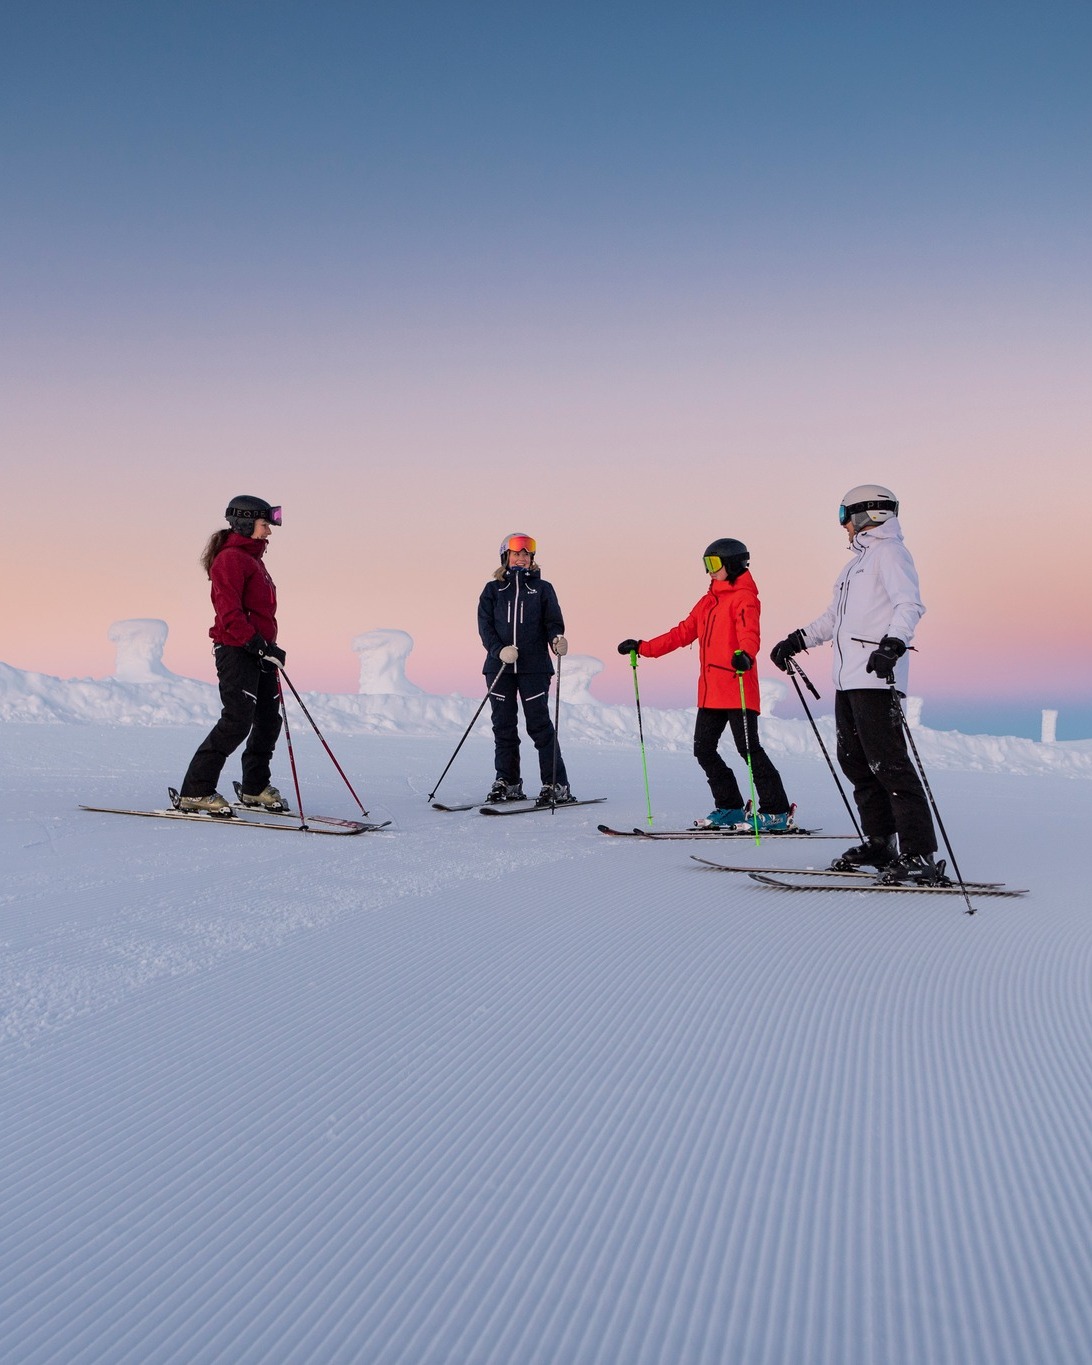 At SkiStar Lodge in Lindvallen and Hundfjället, you'll find everything you need for enjoyable and memorable days together